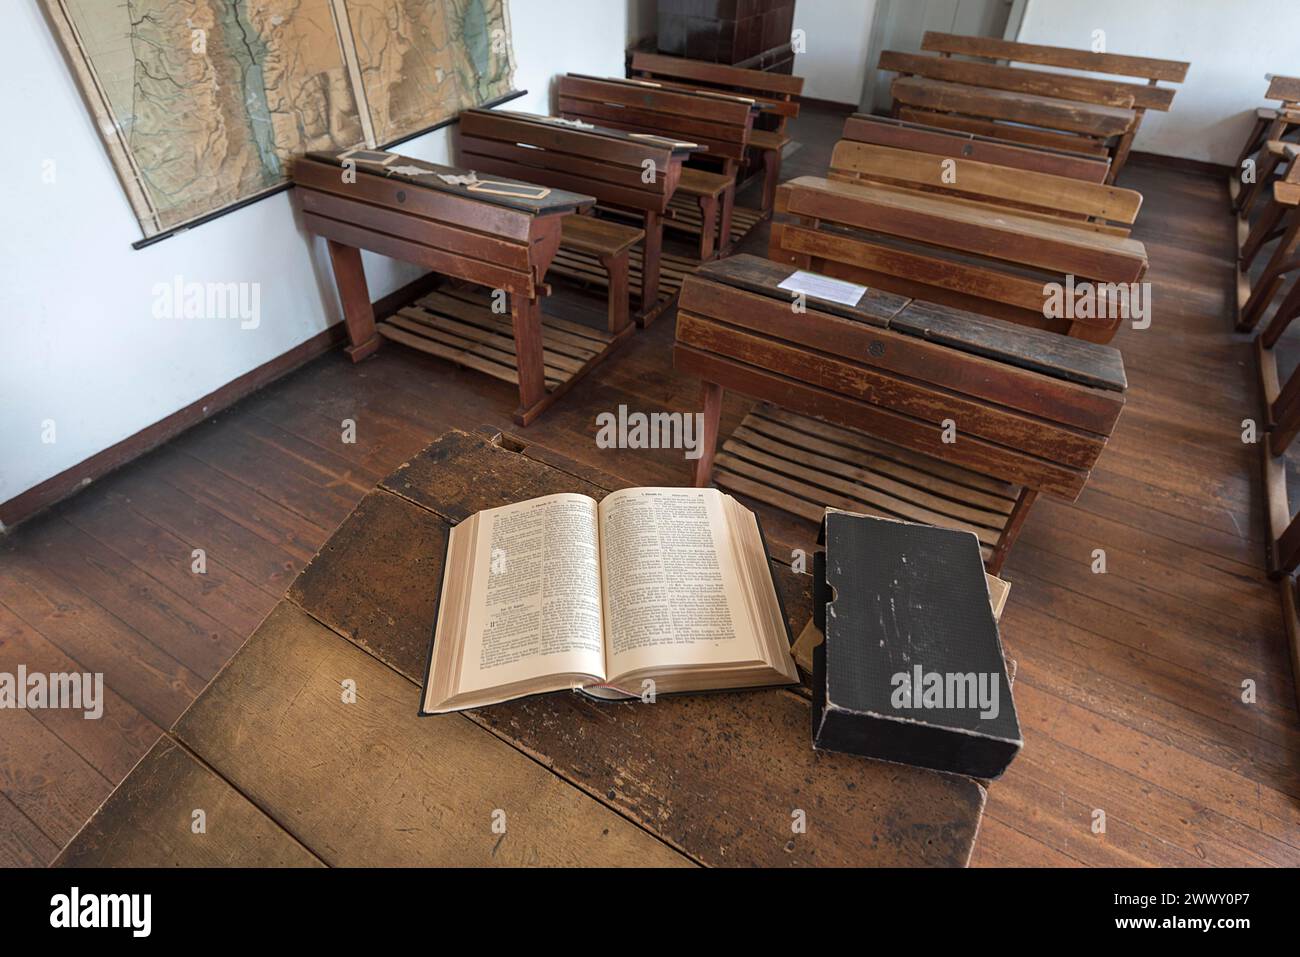 Classroom with Bible on the teacher's desk and school desks from the 19th century, Open-Air Museum of Folklore Schwerin-Muess Stock Photo